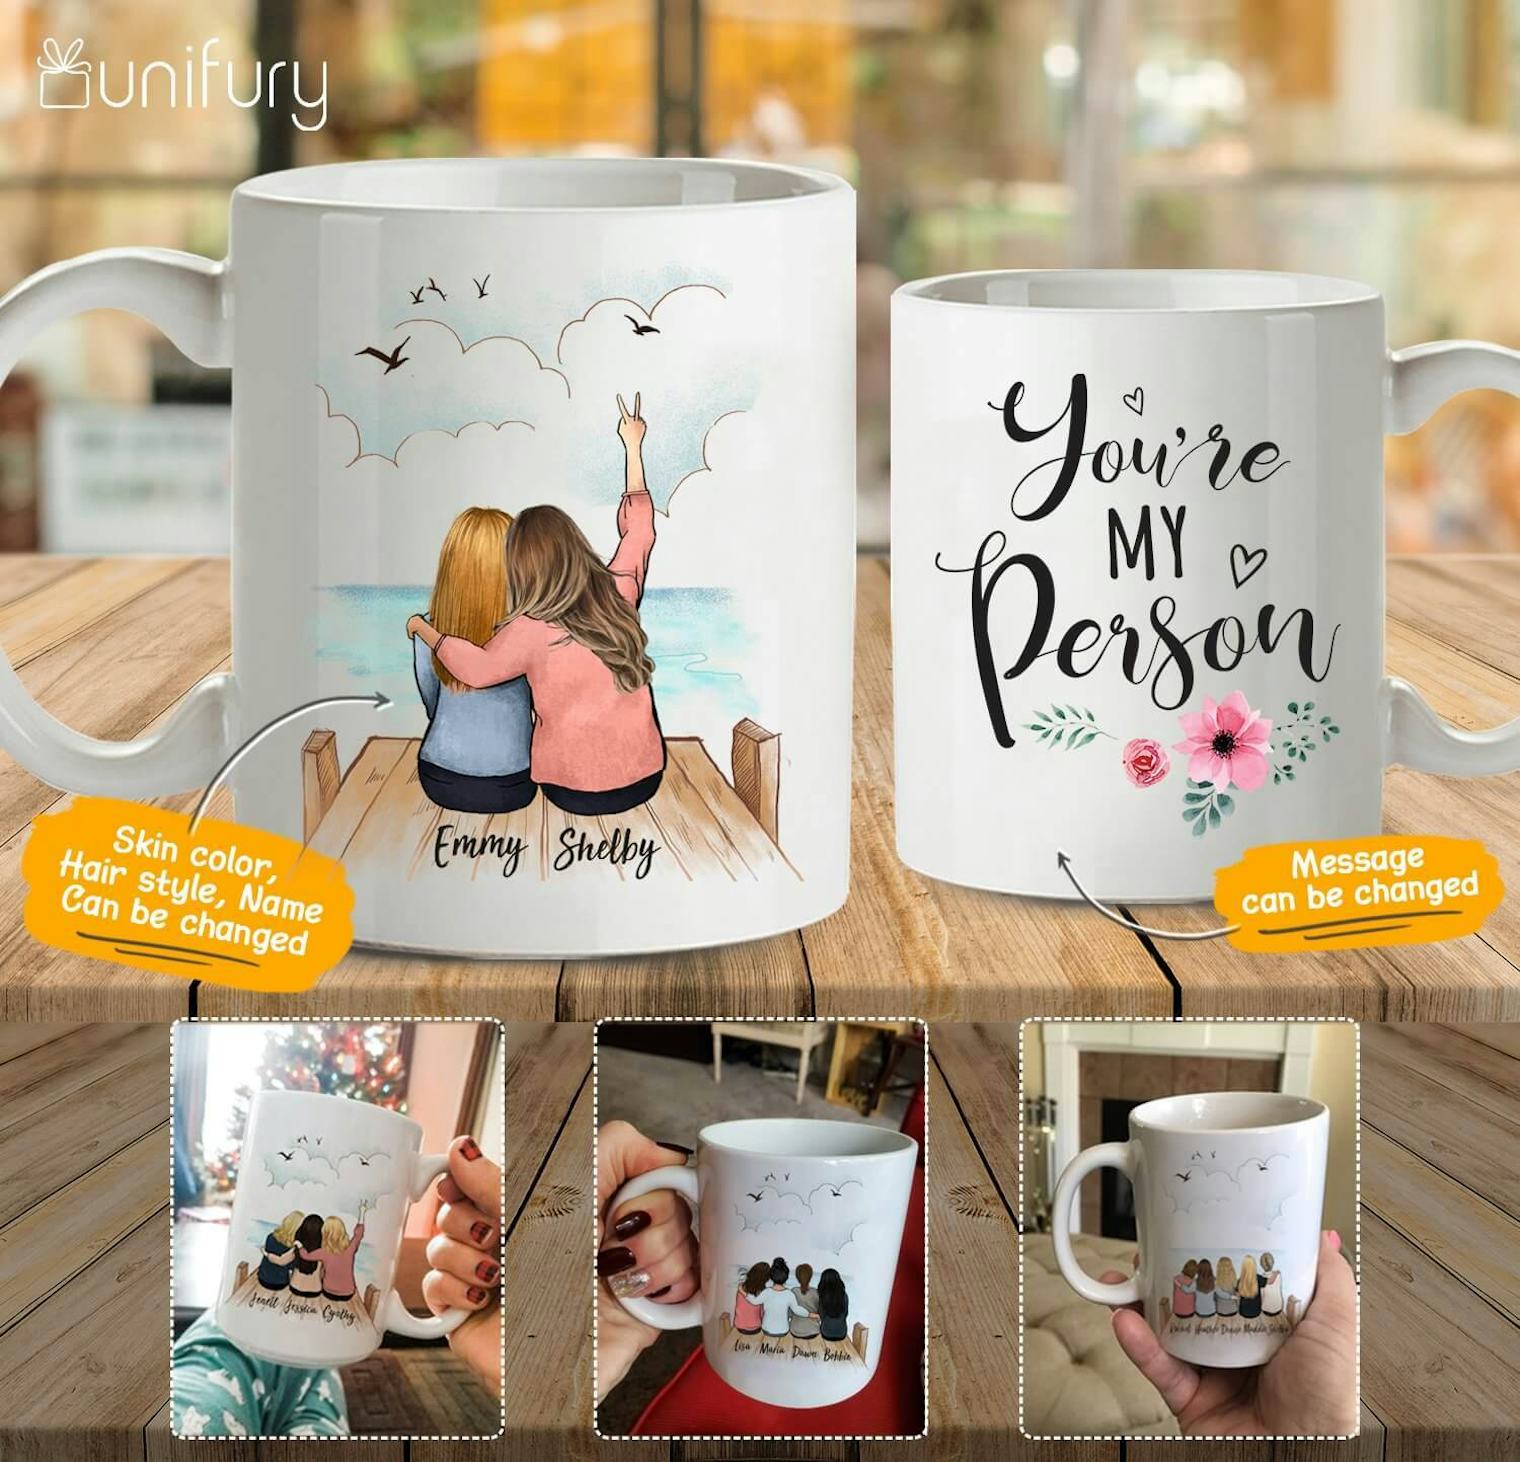 This Personalized Best Friends Mug Is The Sweetest Way To